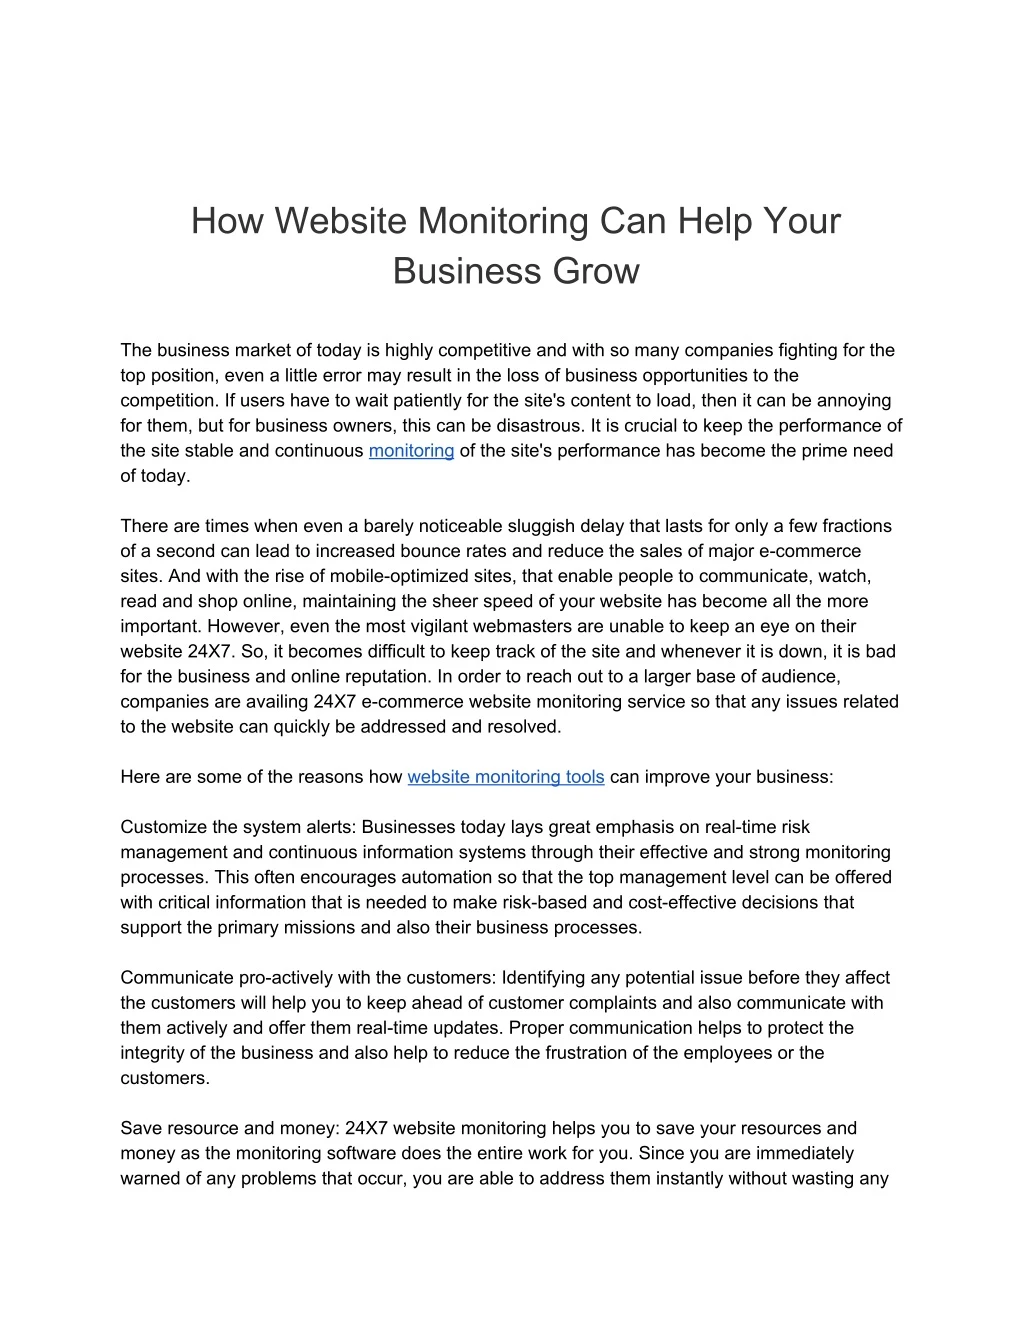 how website monitoring can help your business grow